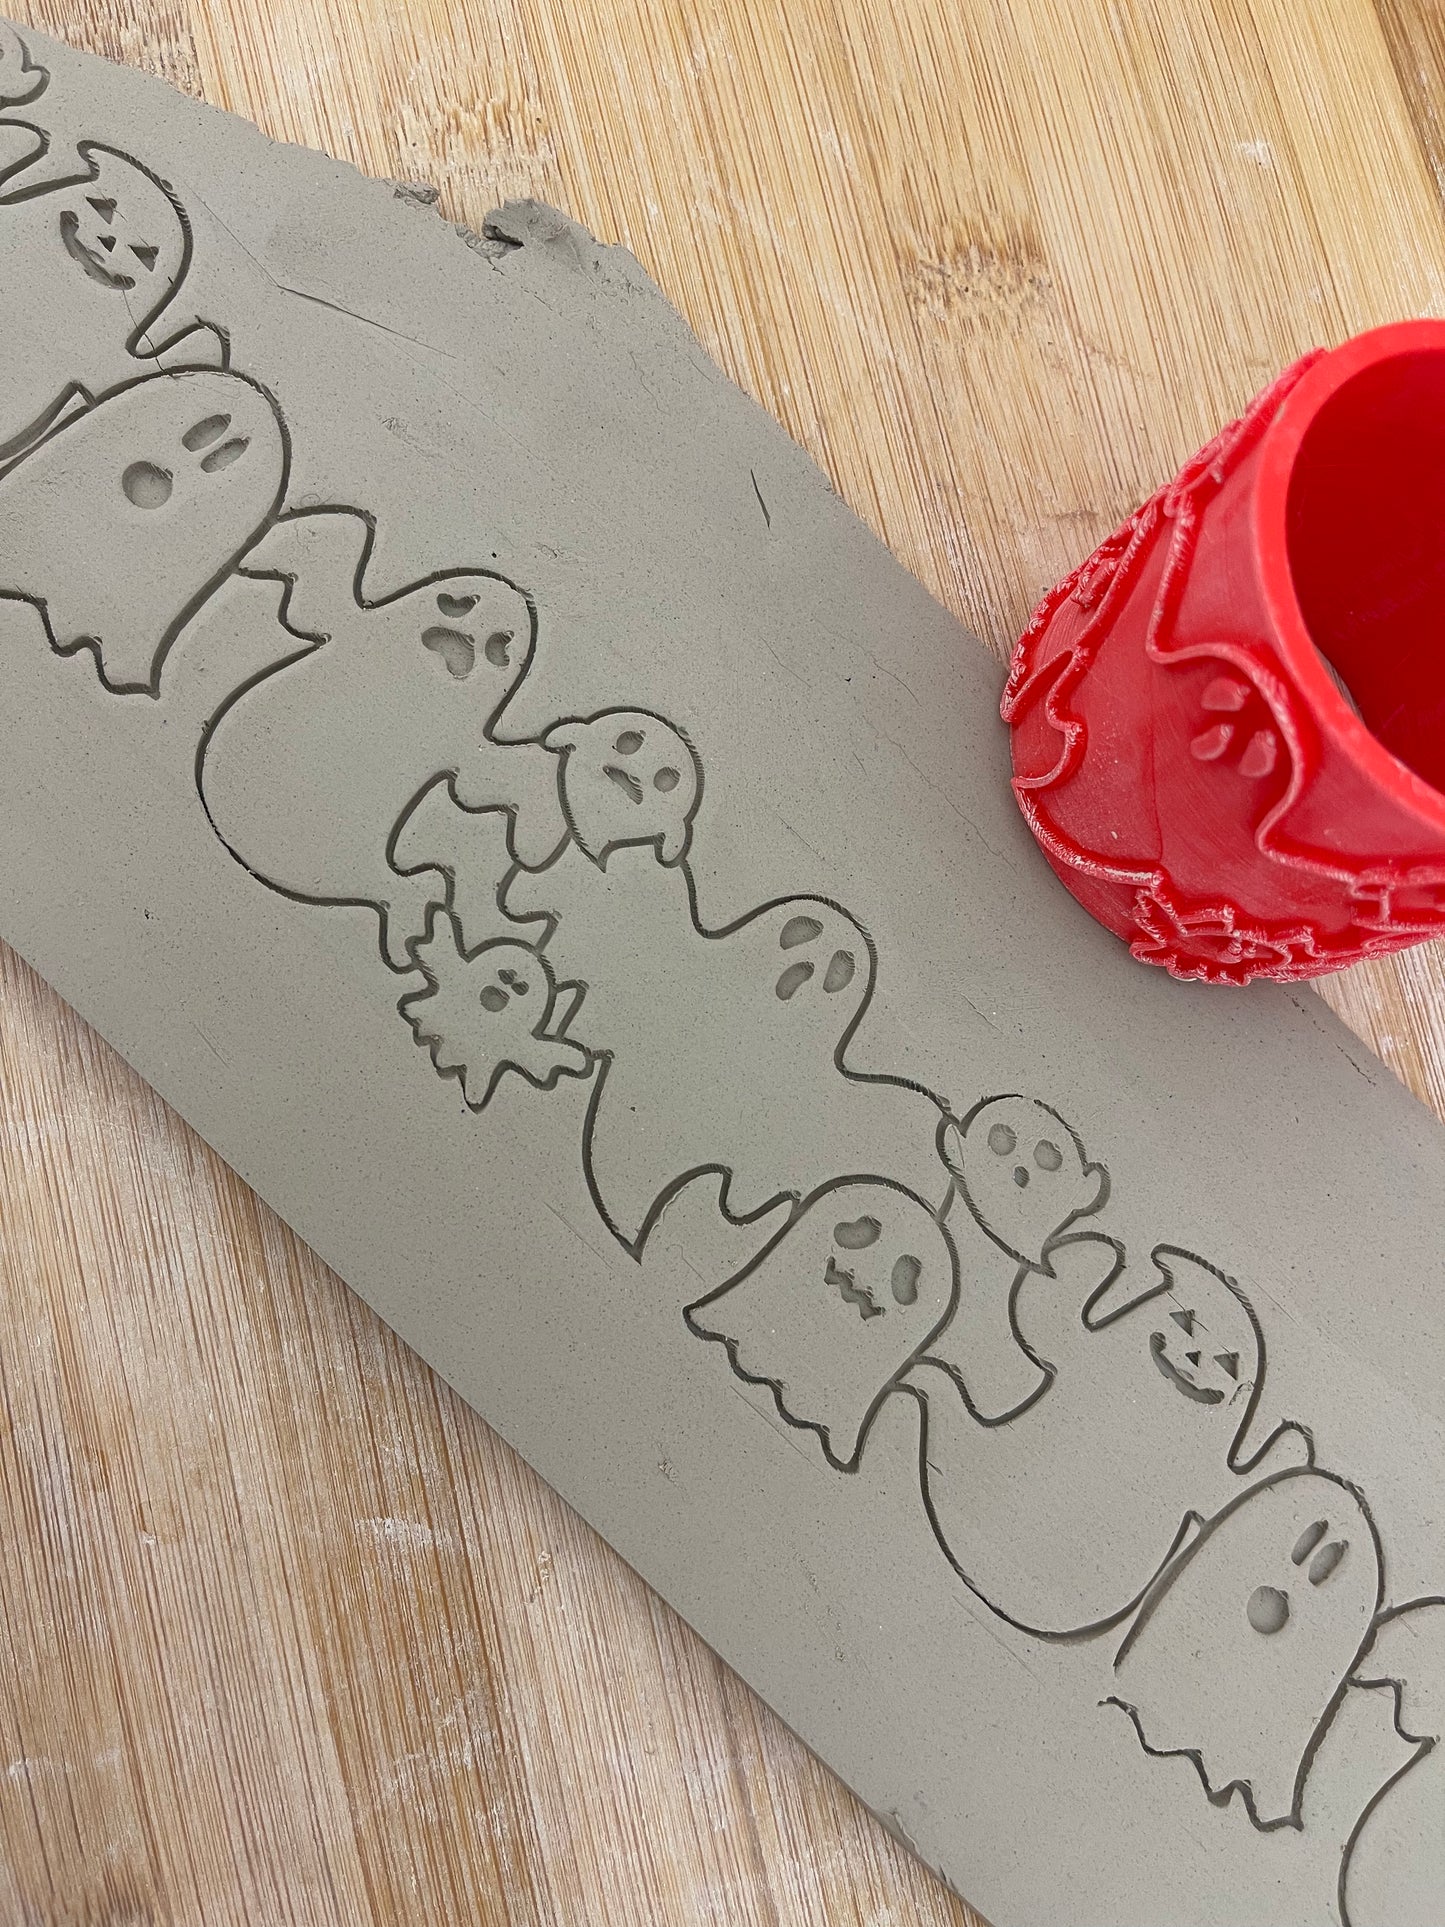 Halloween Ghost Pottery Roller - Border Stamp, Repeating design, Plastic 3d printed